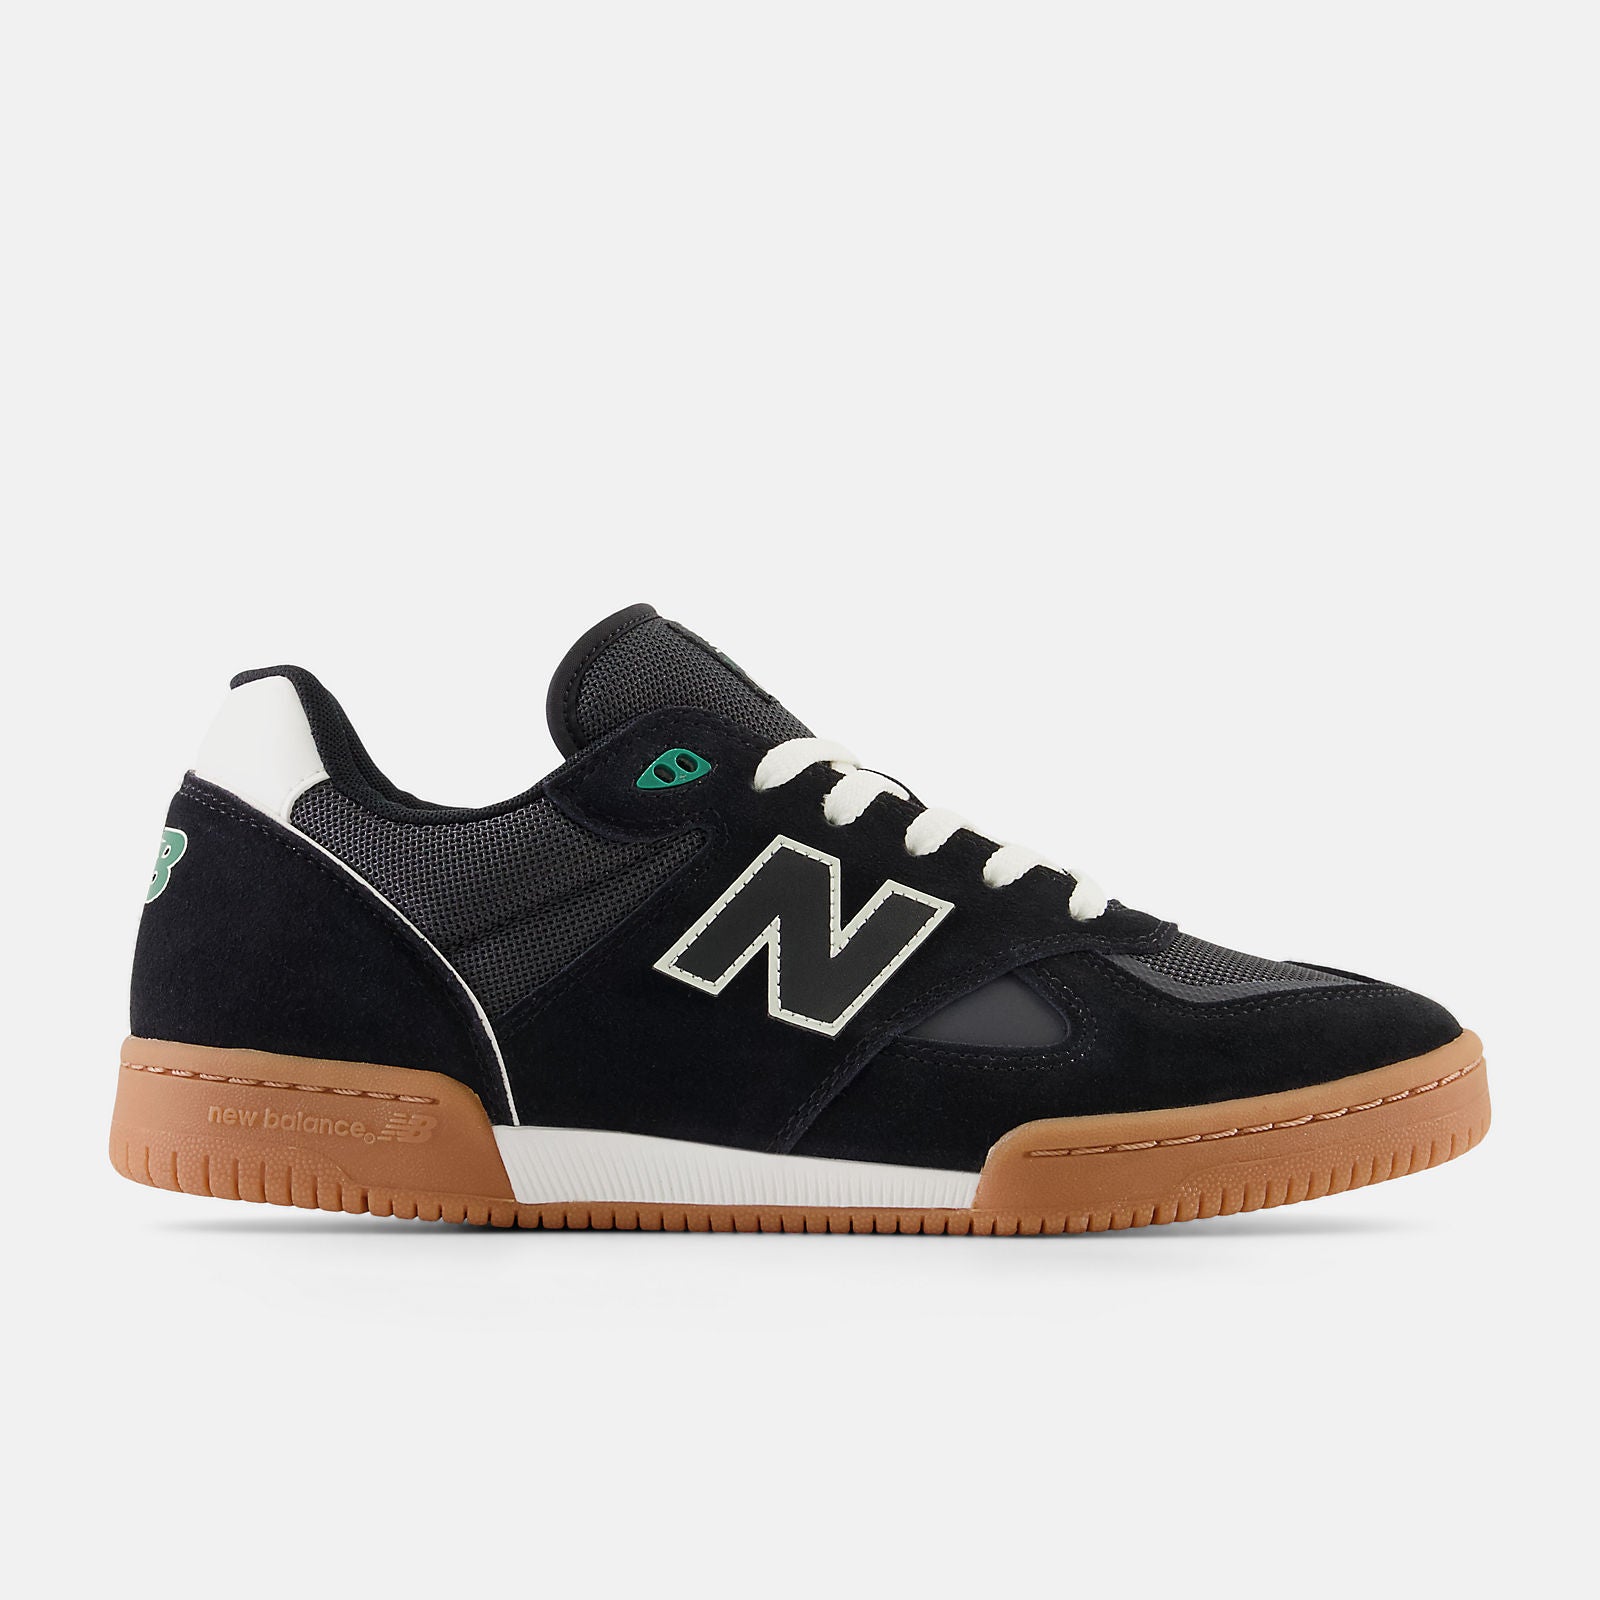 NB Numeric Tom Knox 600 Sneakers - Black and White